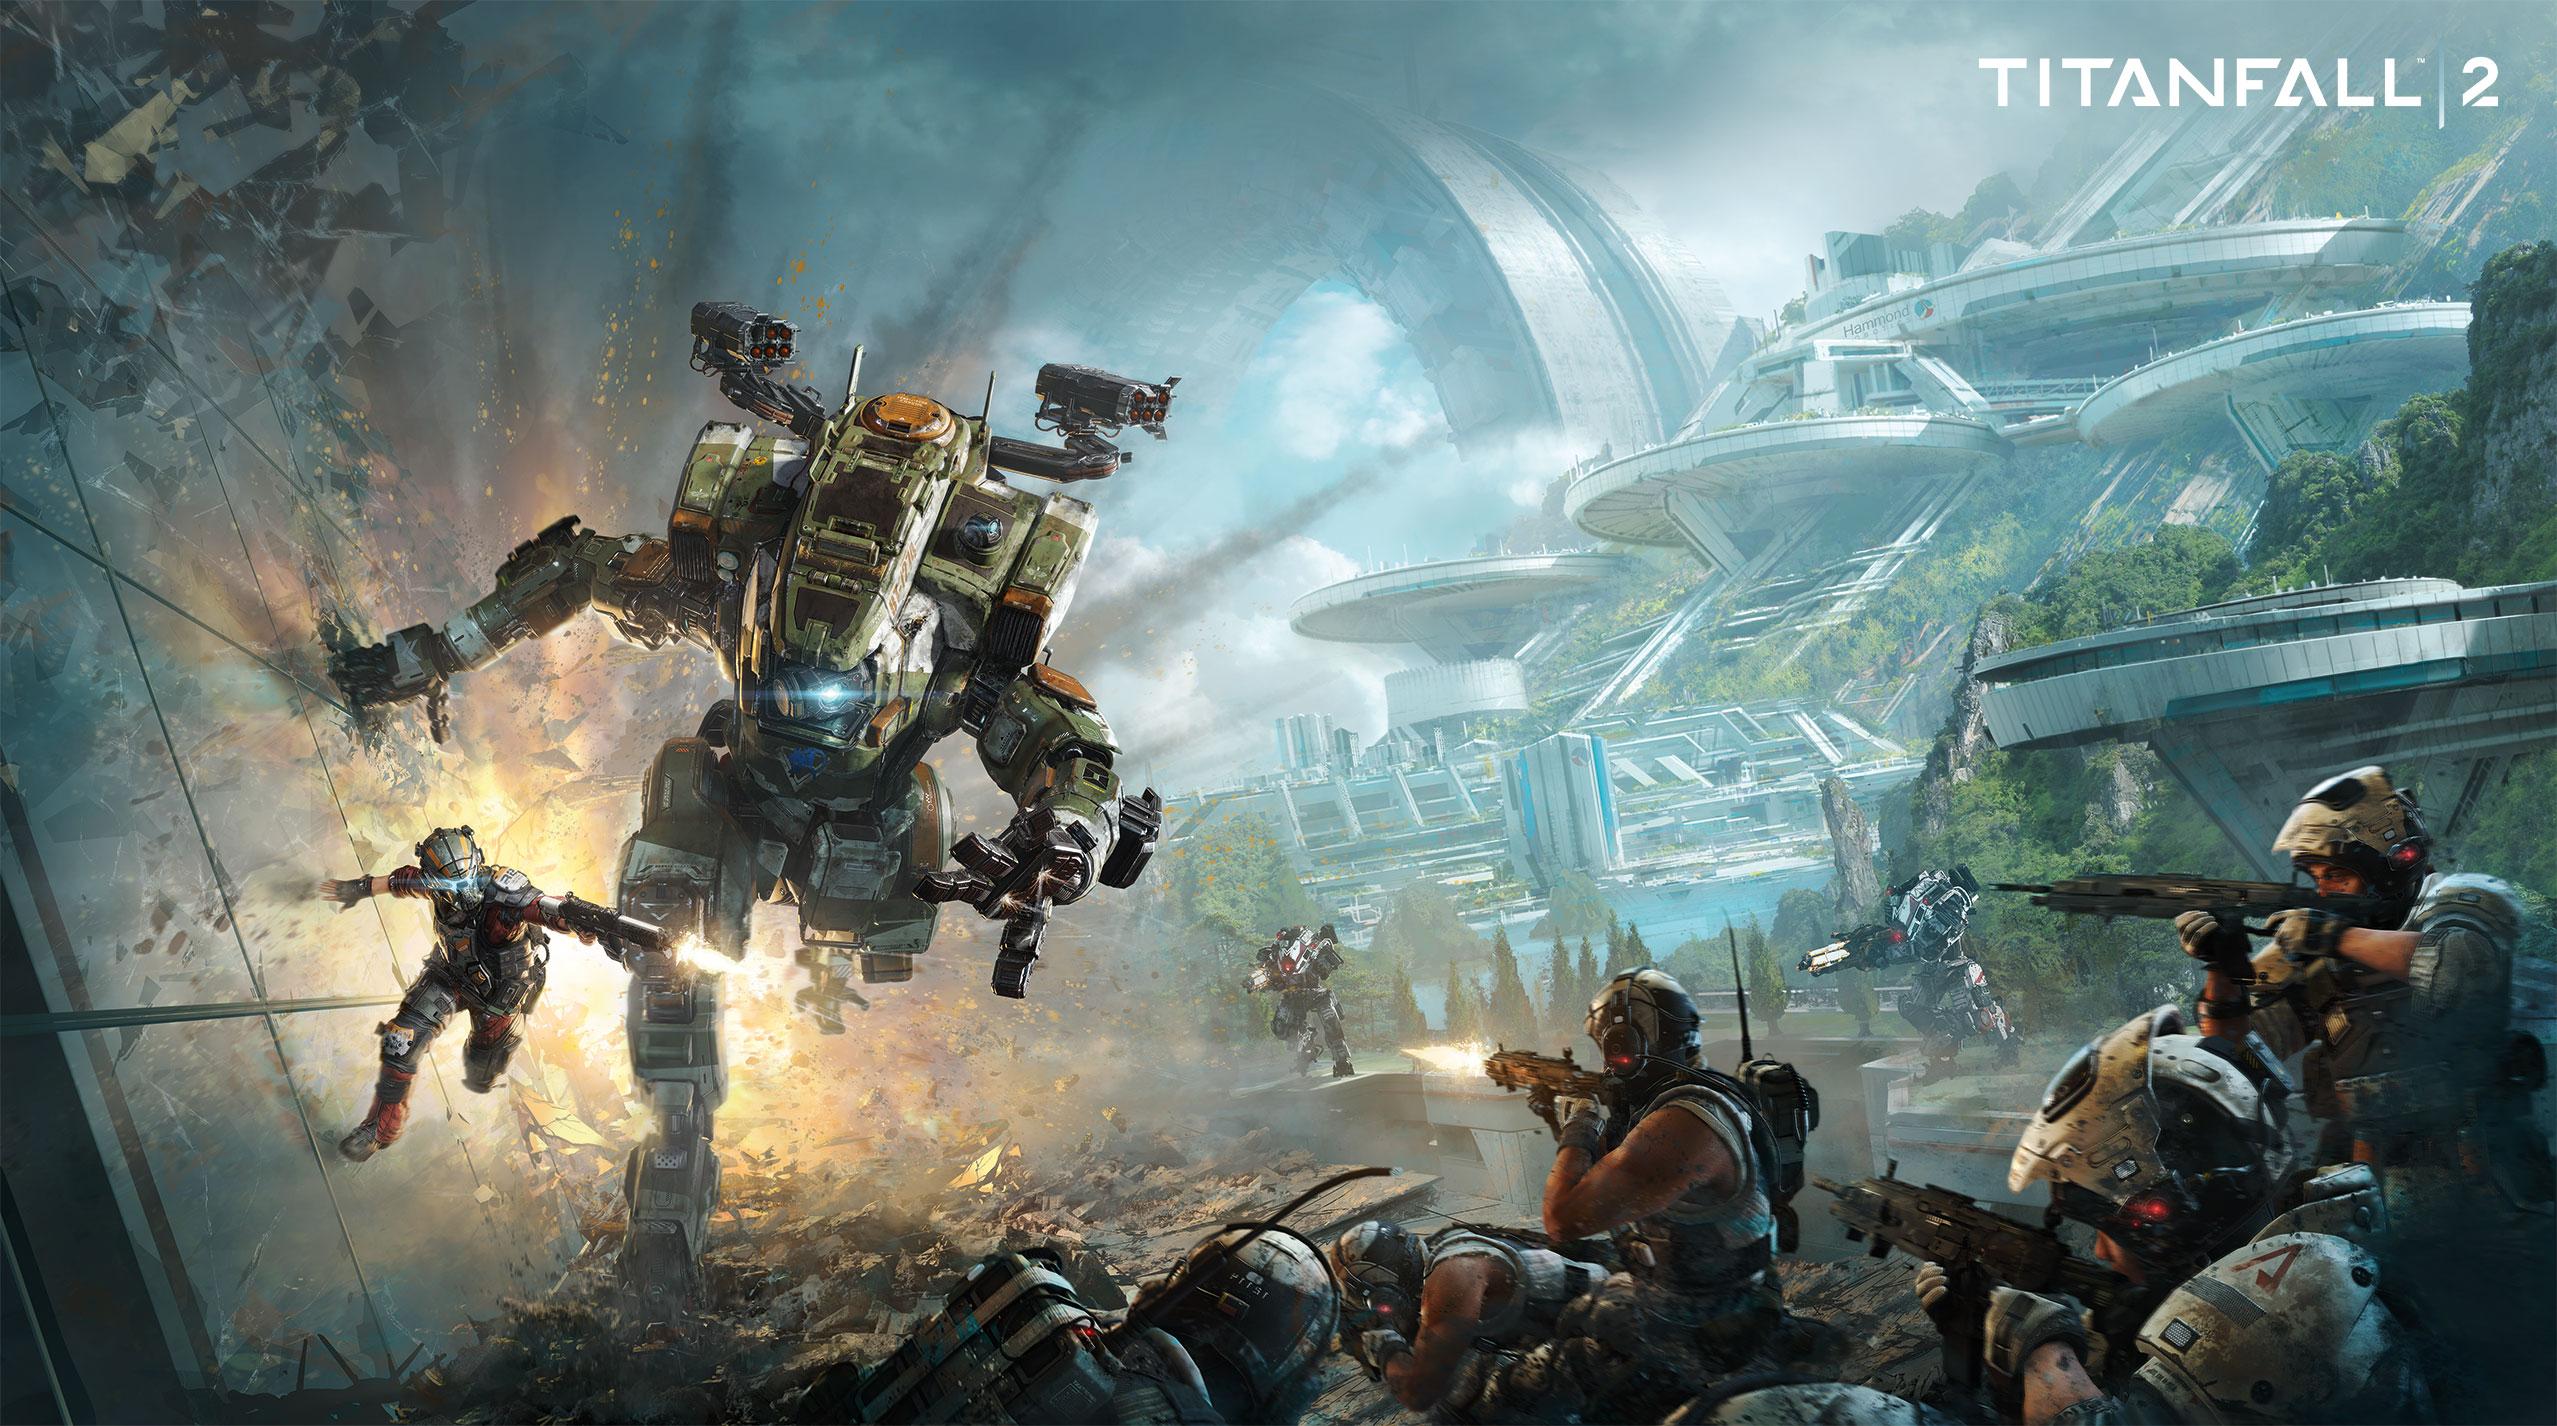 Respawn neglects PC for Titanfall 2 multiplayer beta